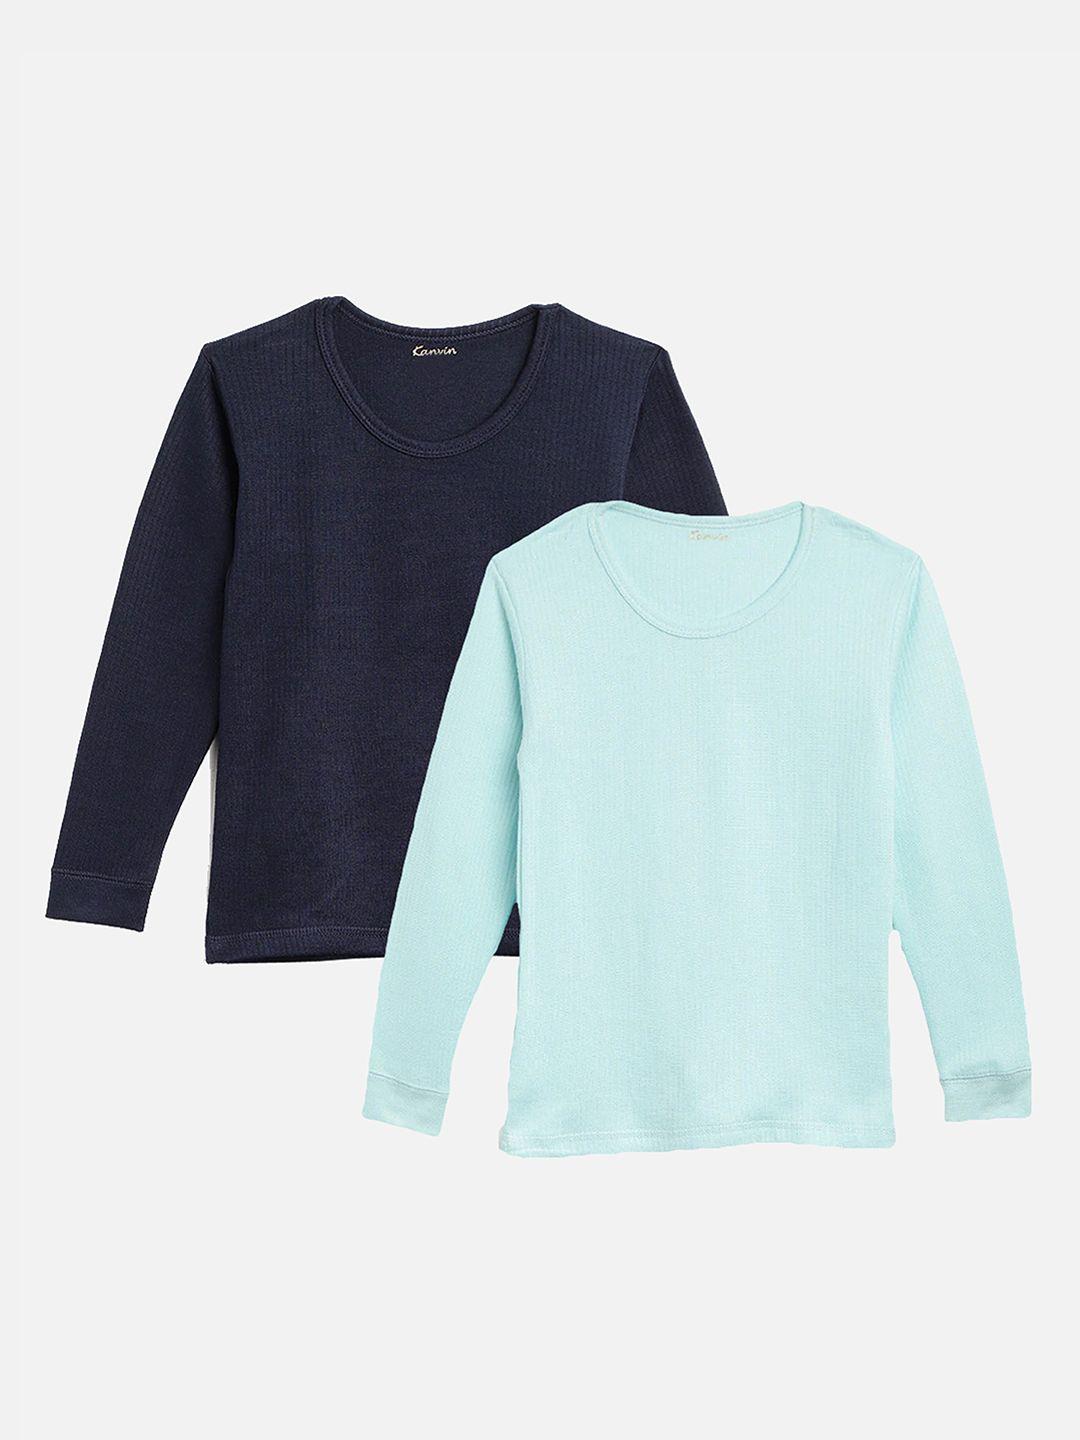 kanvin boys  pack of 2 navy blue & turquoise blue ribbed cotton thermal tops